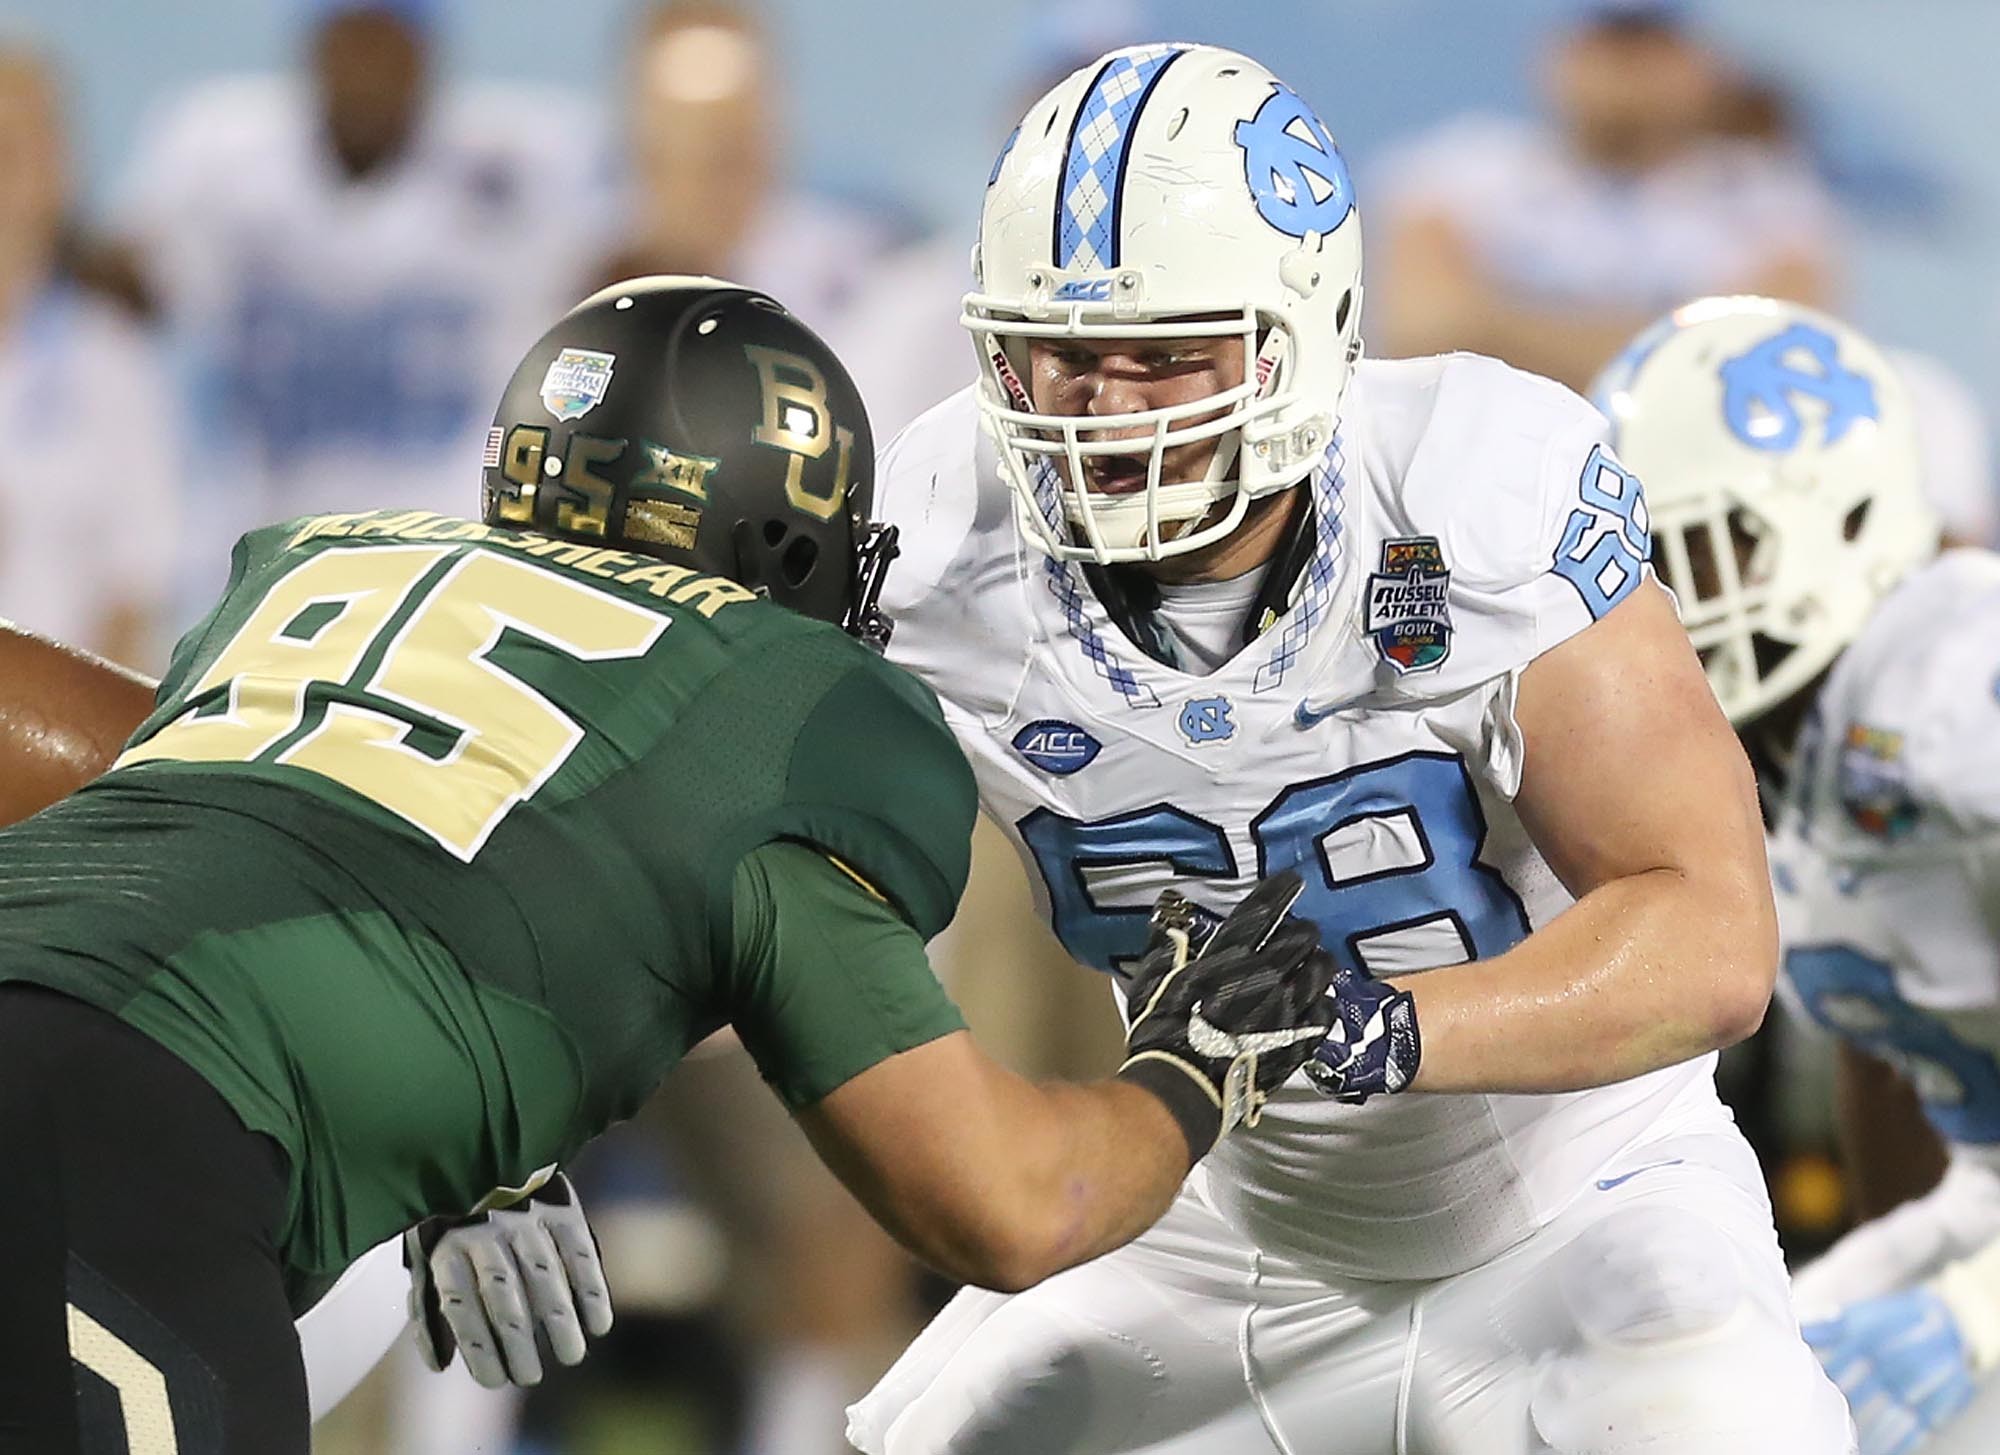 The Russell Athletic Bowl on Orlando saw a couple of high powered offenses in action. Baylor prevailed over North Carolina 49-38 in a record setting performance. Tar Heels center Lucas Crowley (58) played high school ball at Nease.